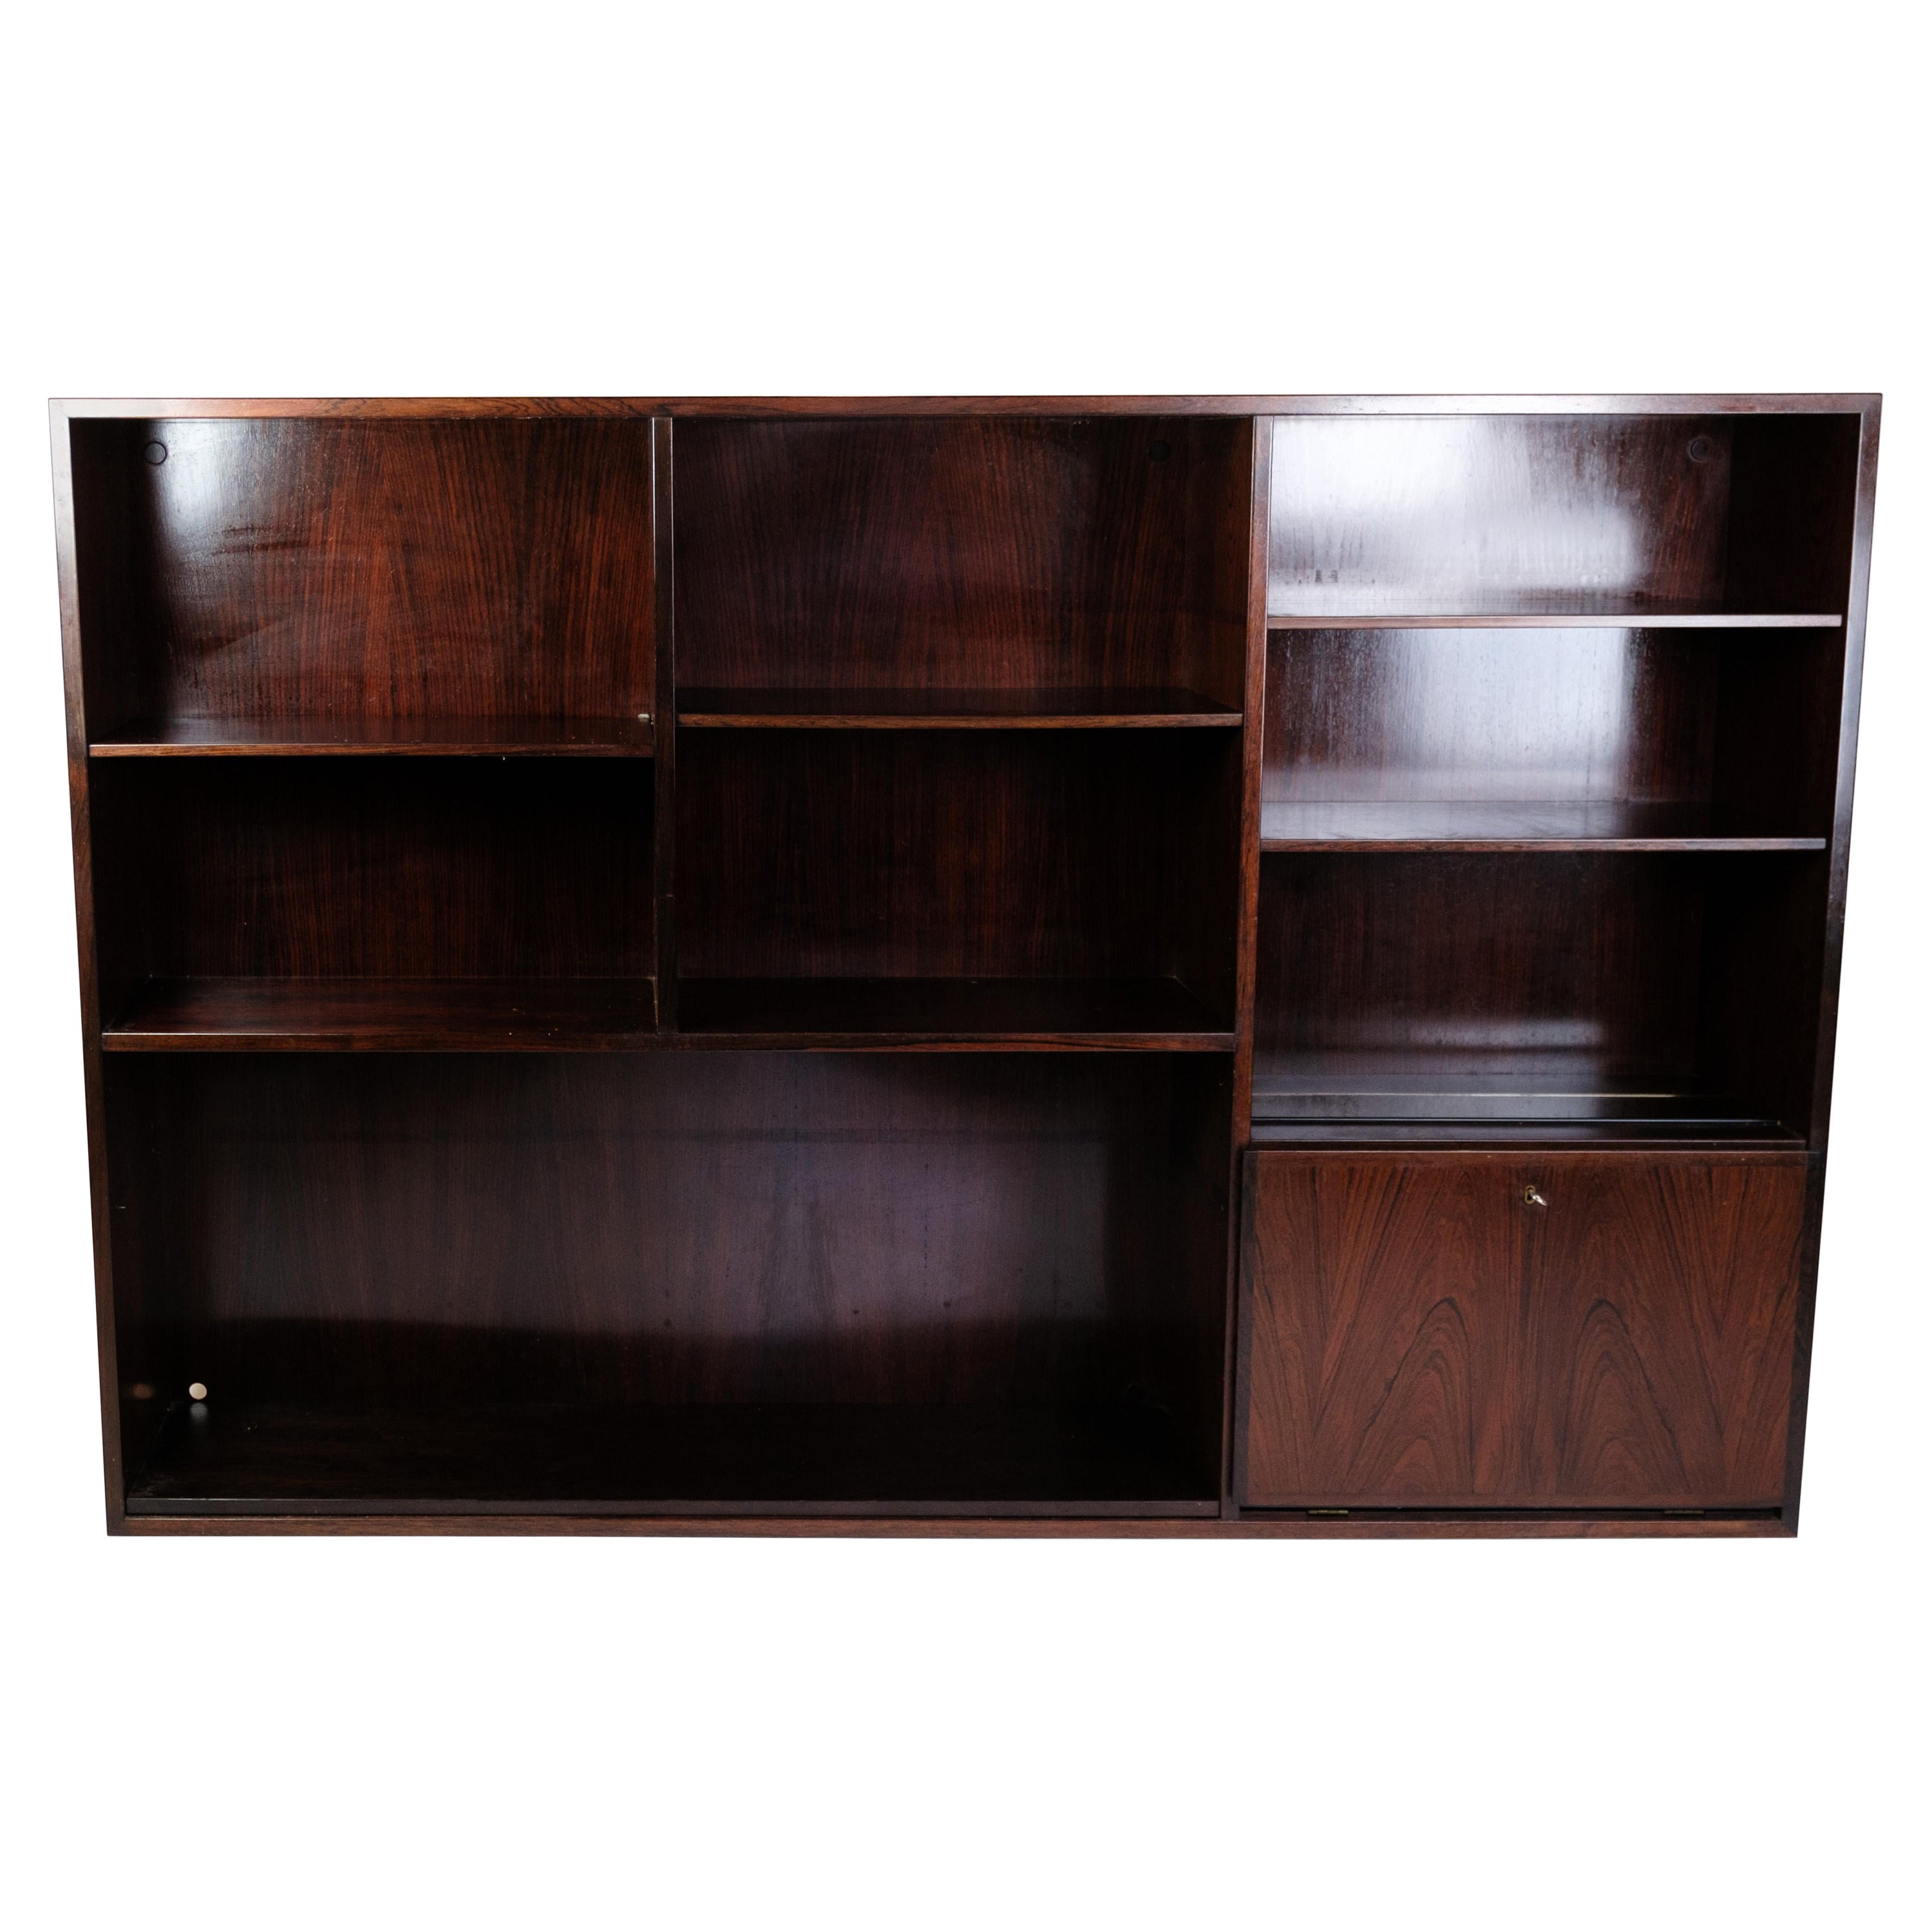 Bookcase Model 35 Made In Rosewood By Omann Jun. Furniture Factory From 1960s For Sale